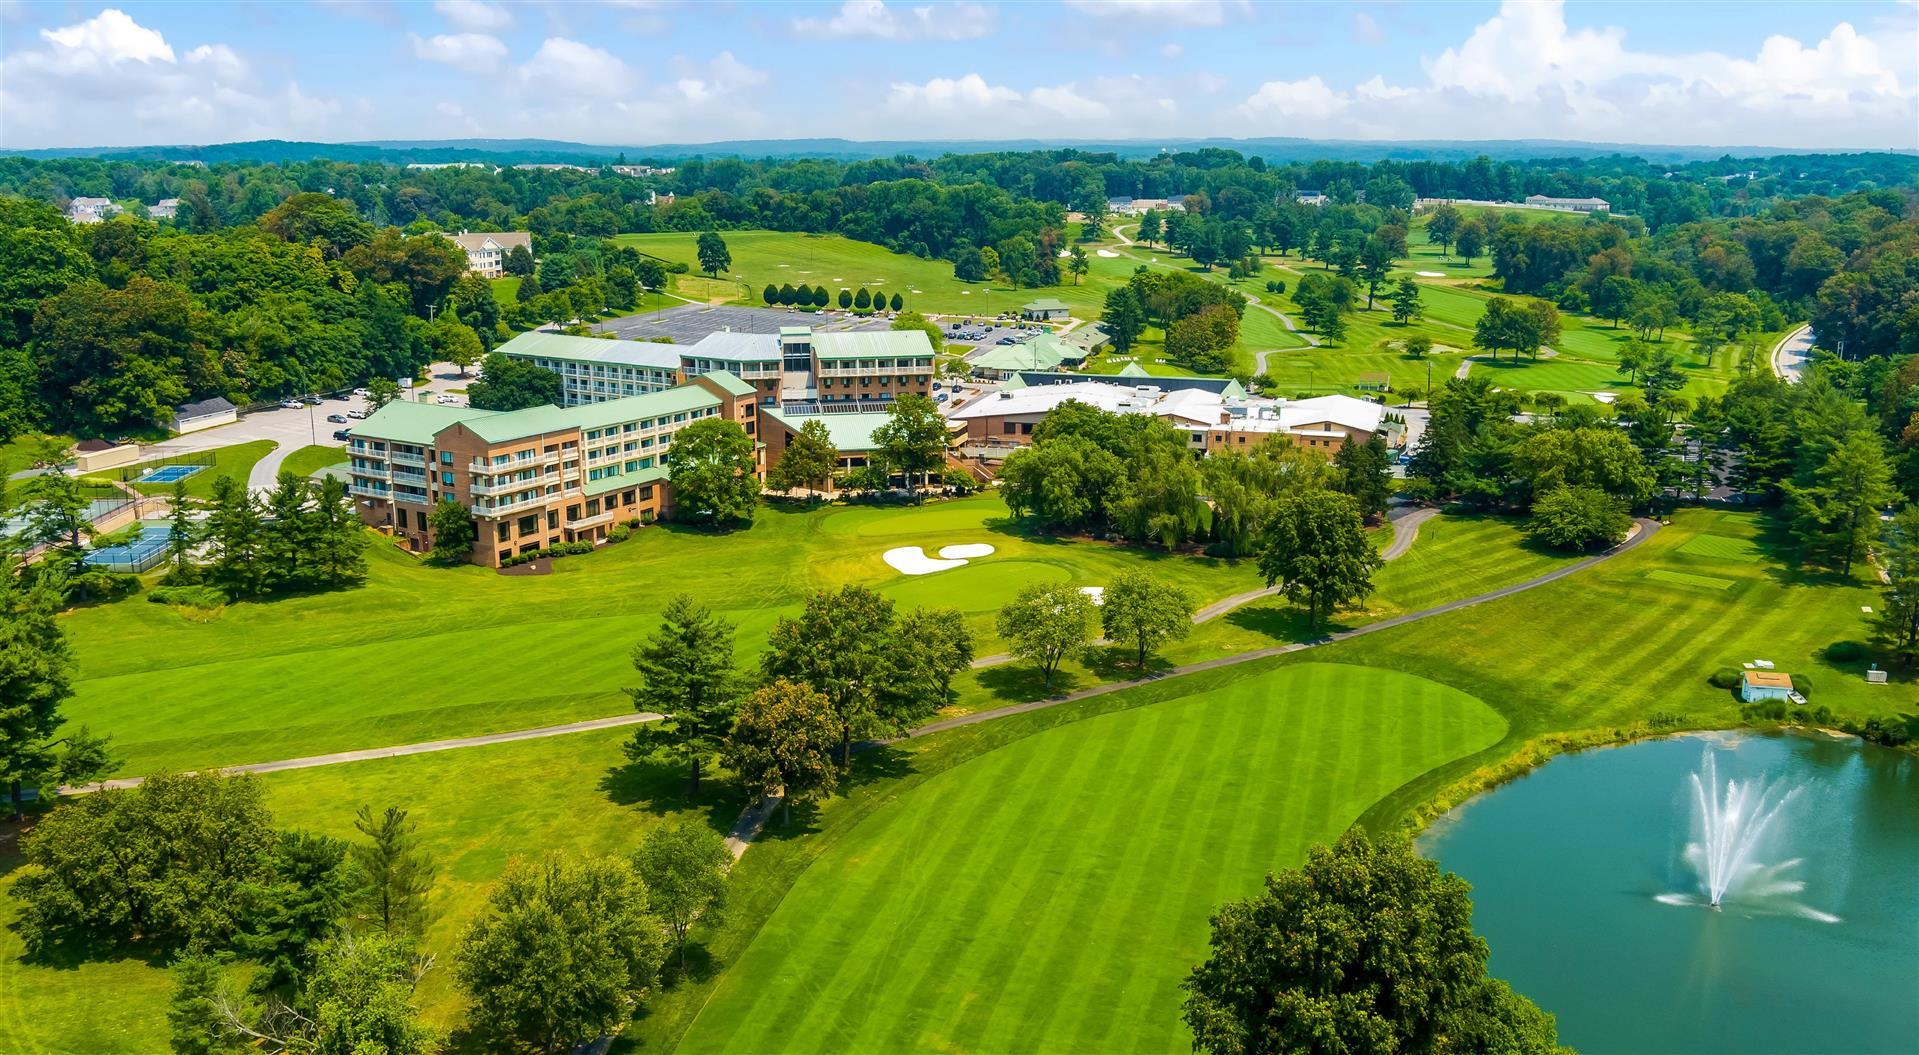 Turf Valley Resort and Conference Center in Ellicott City, MD